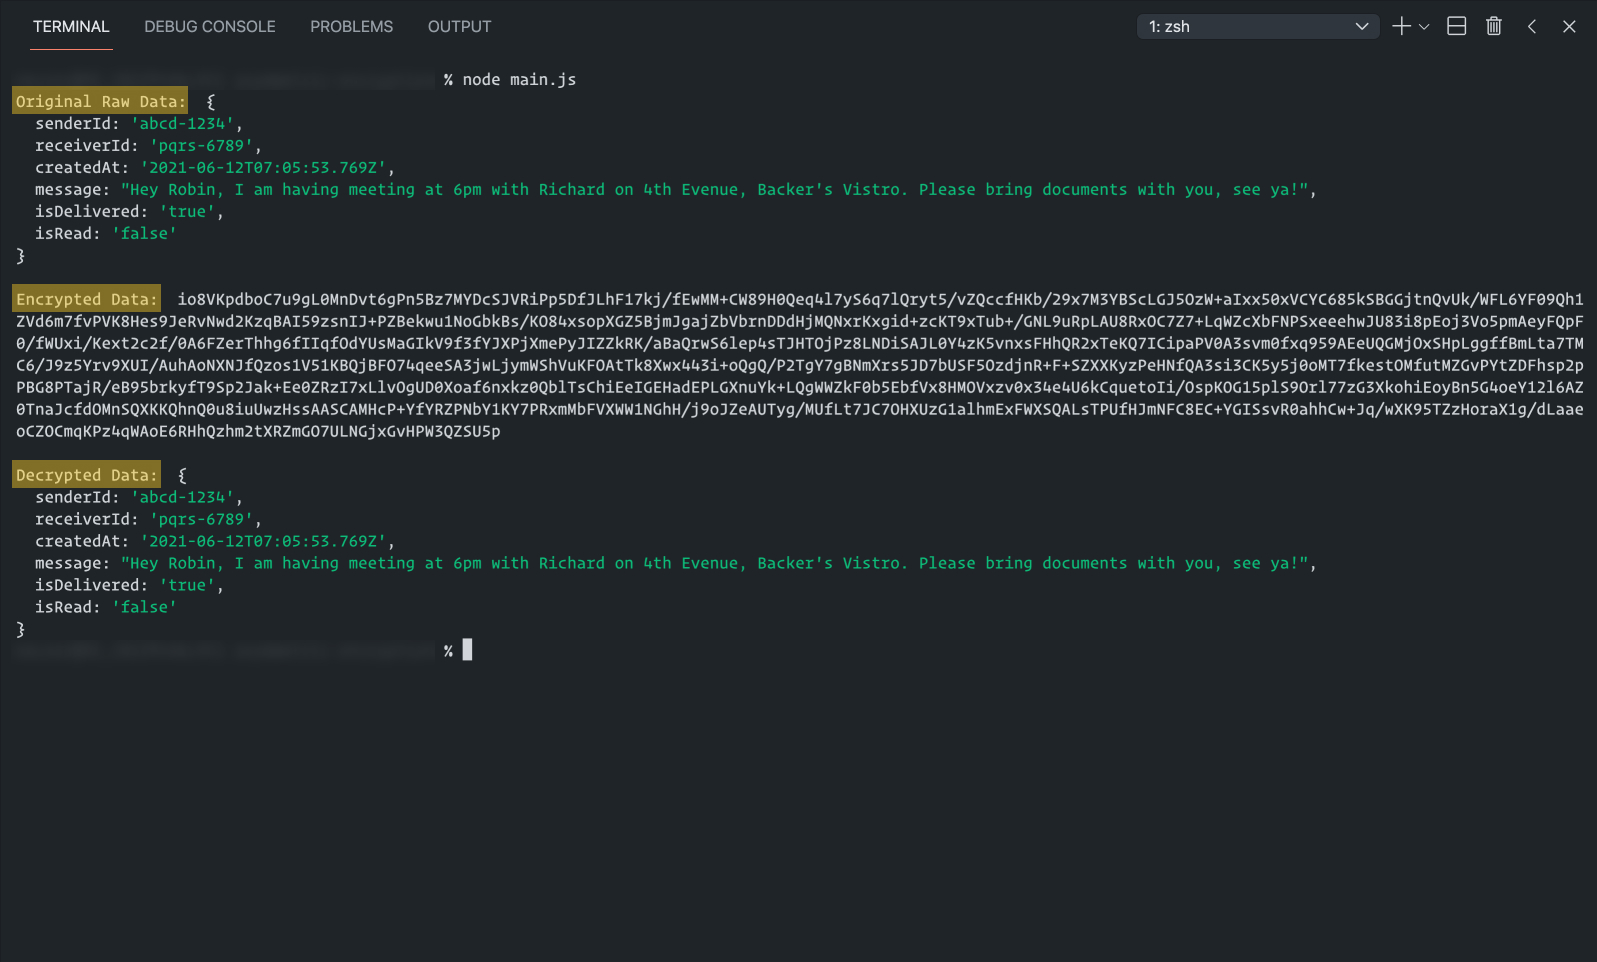 Terminal Preview Showing (a) Original Raw Data, (b) Encrypted Data & (c) Decrypted Data, From Top To Bottom Respectively.